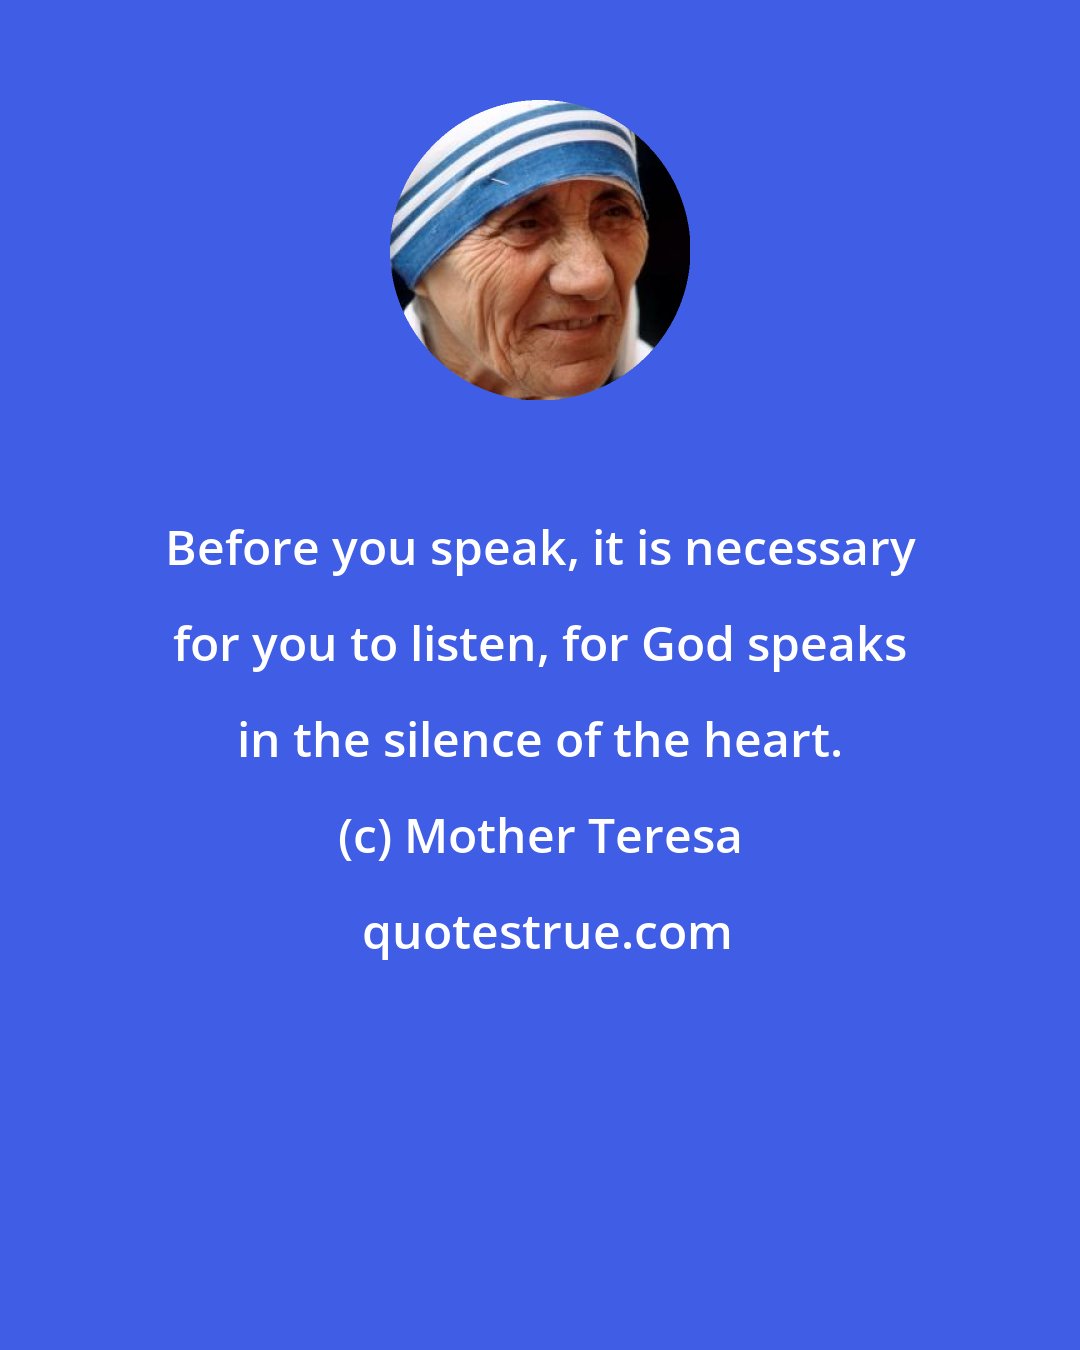 Mother Teresa: Before you speak, it is necessary for you to listen, for God speaks in the silence of the heart.